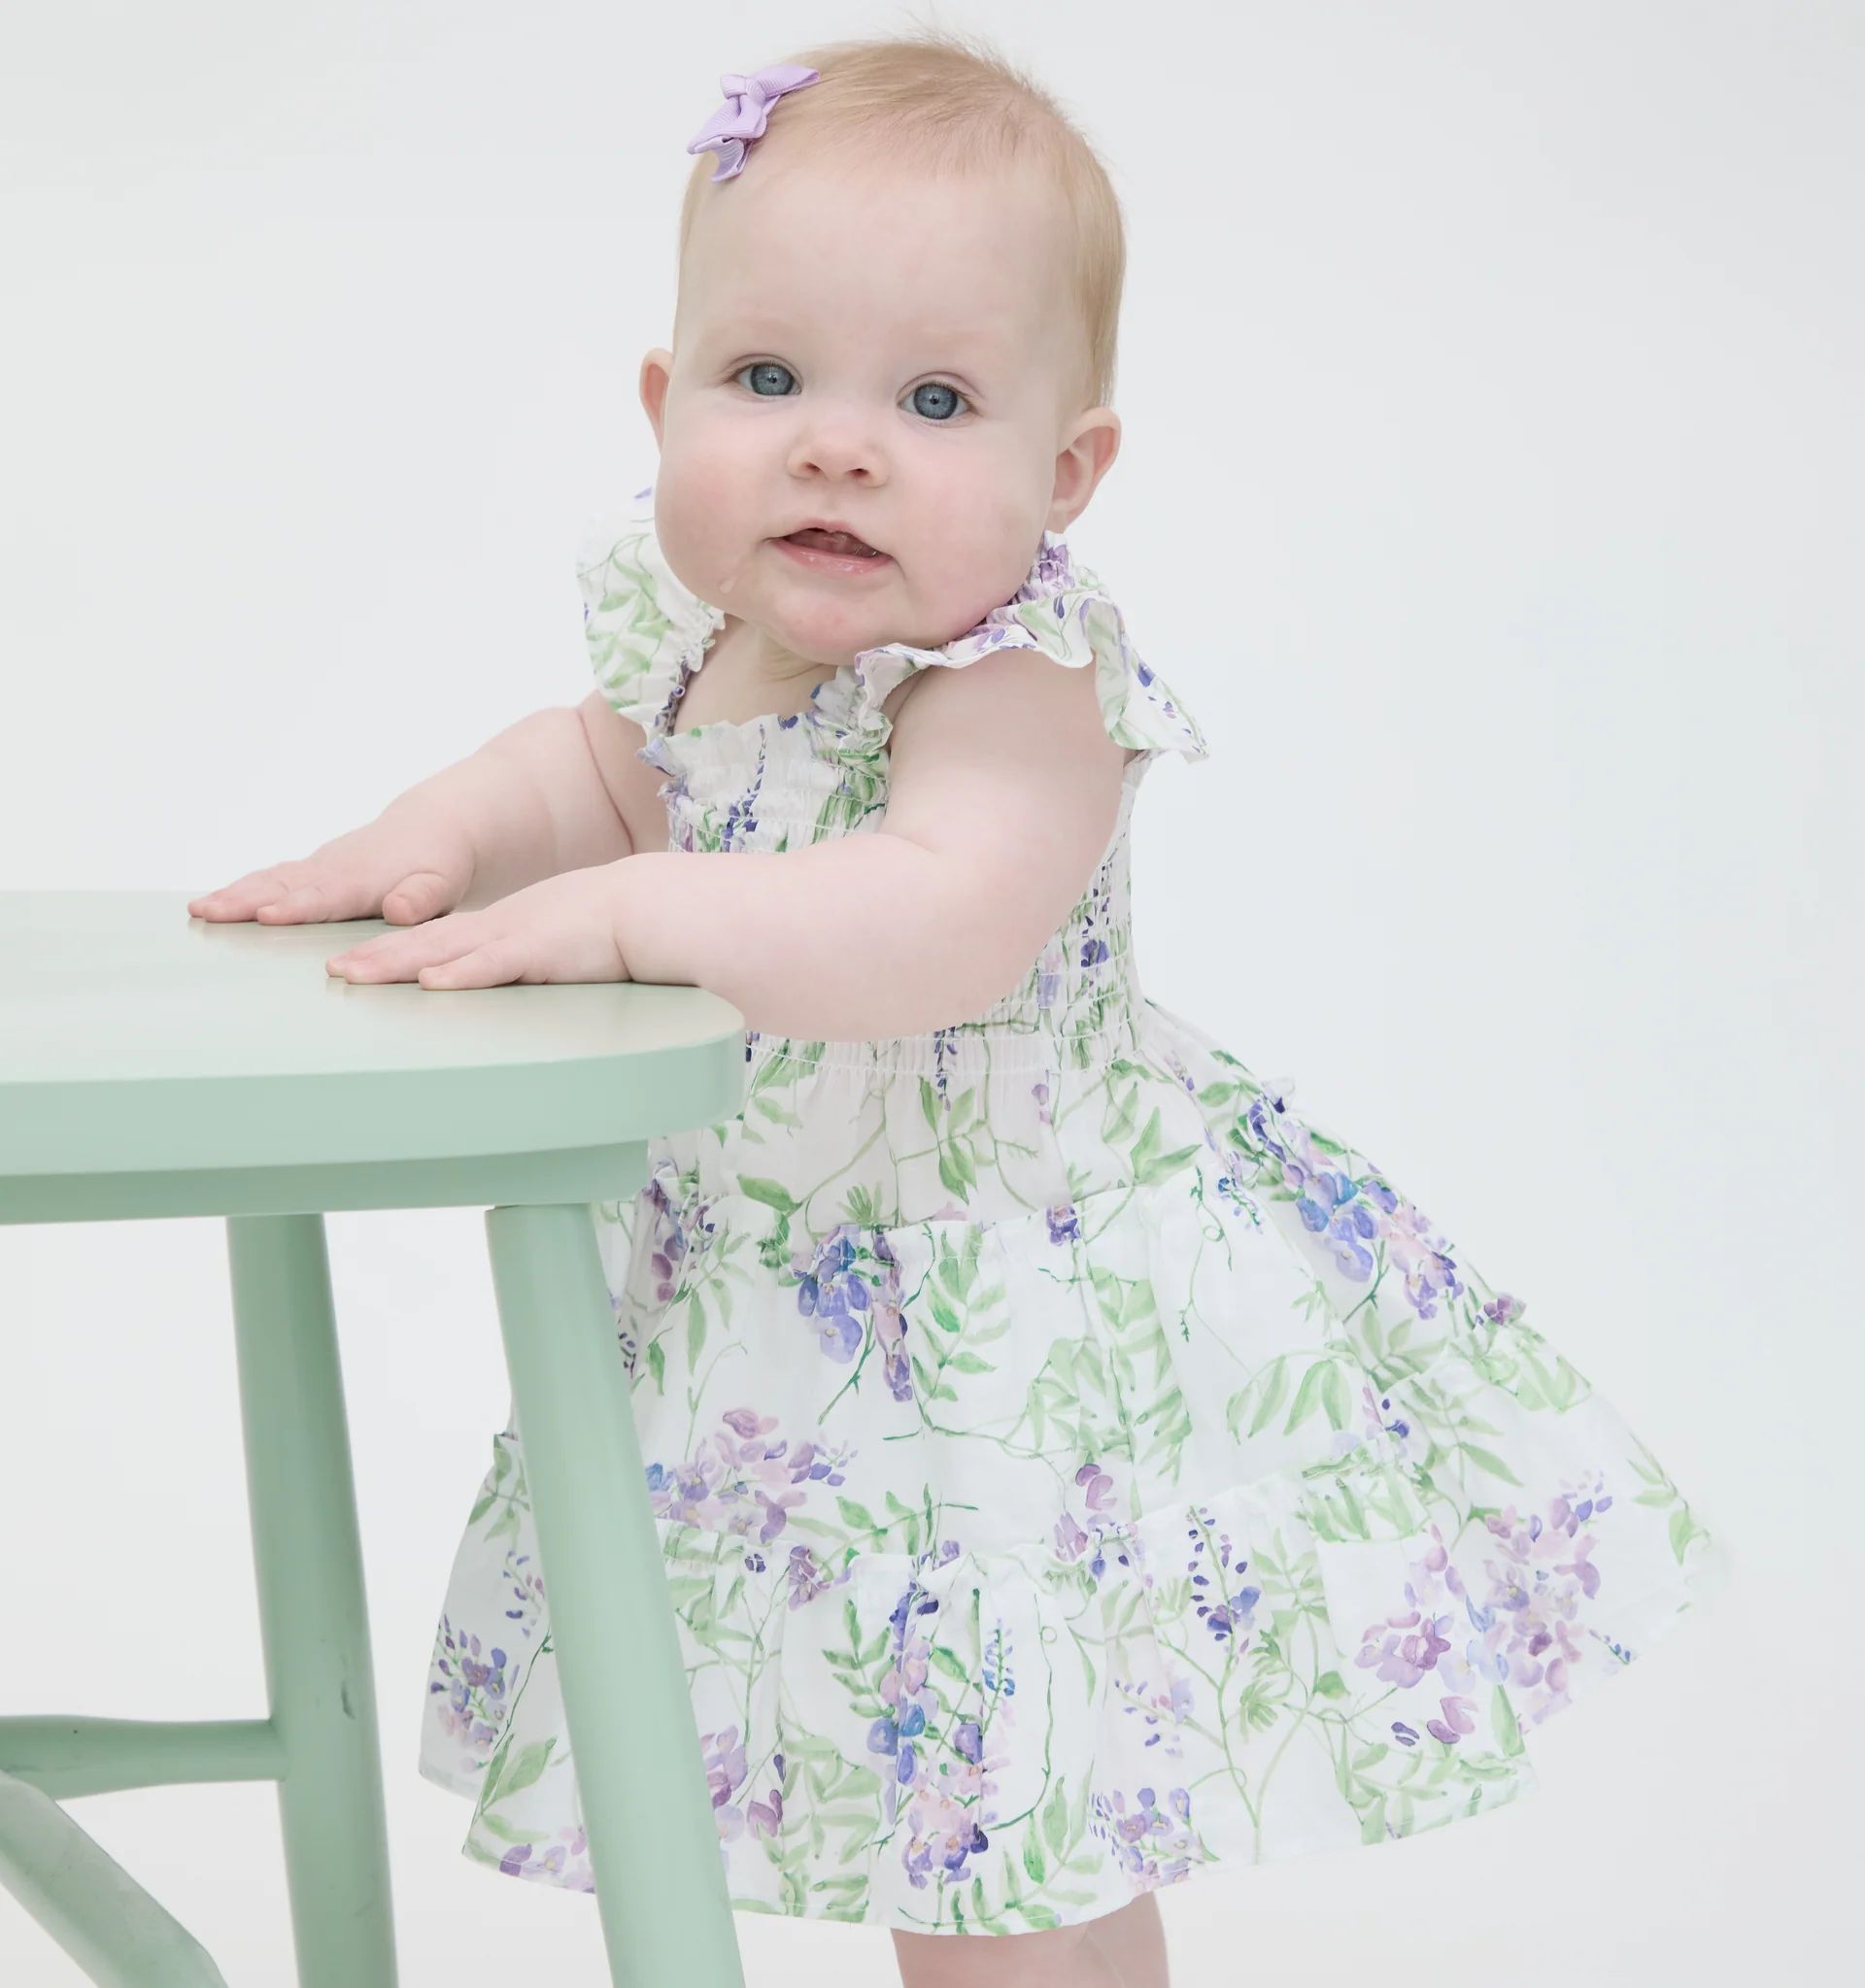 The Baby Ellie Nap Dress | Hill House Home